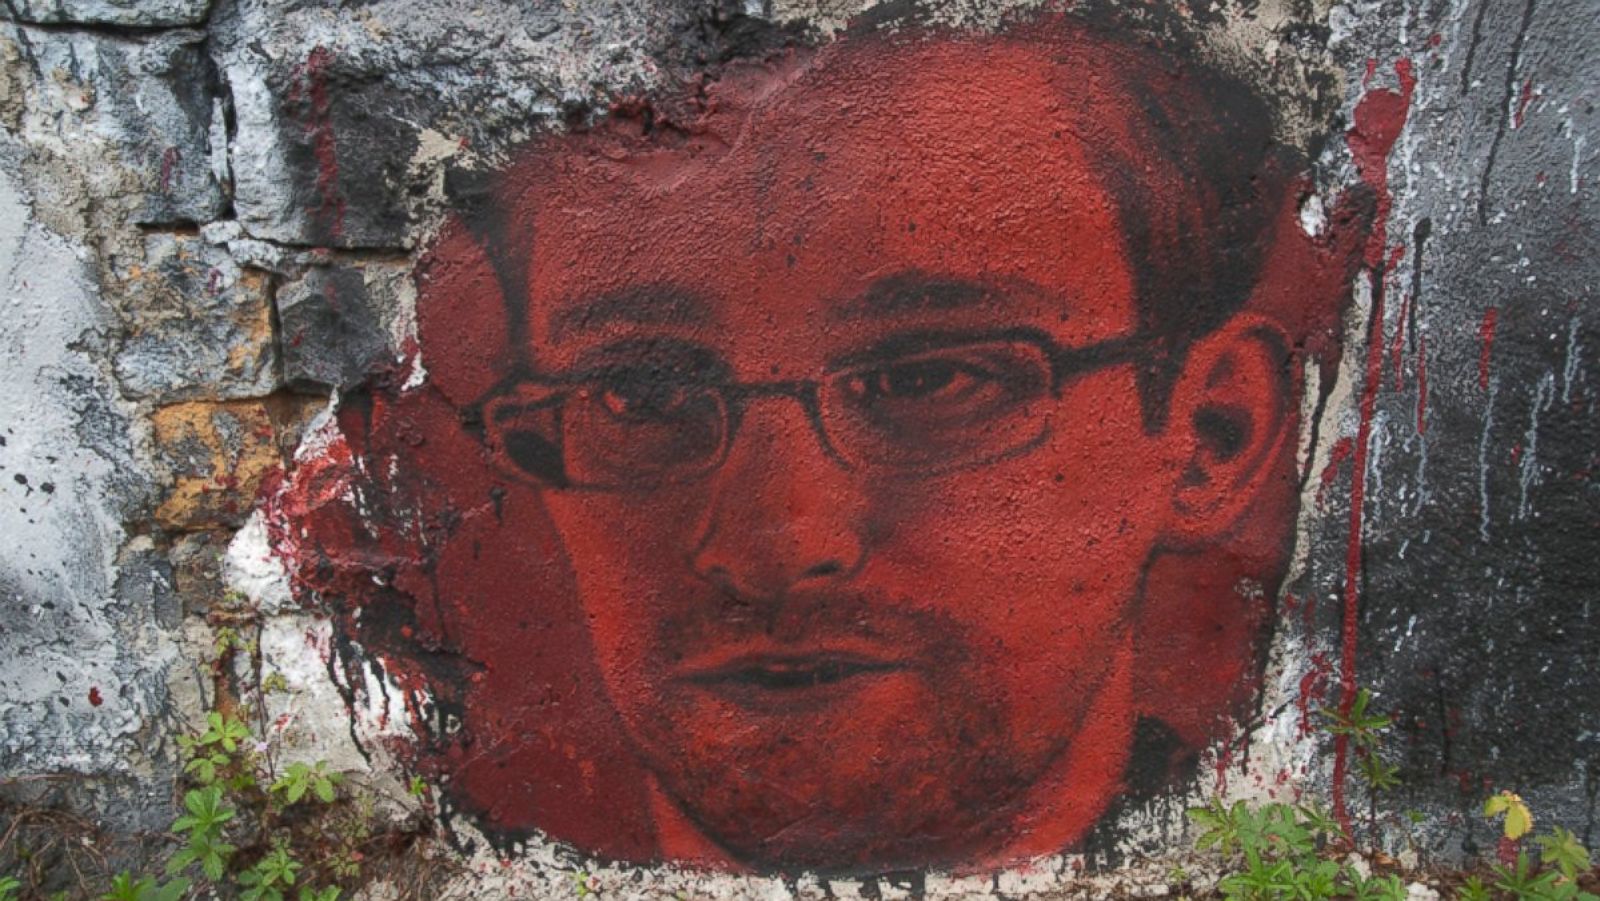 Snowden calls Russian-Spy allegation ''Absurd'', demands protection after US threats